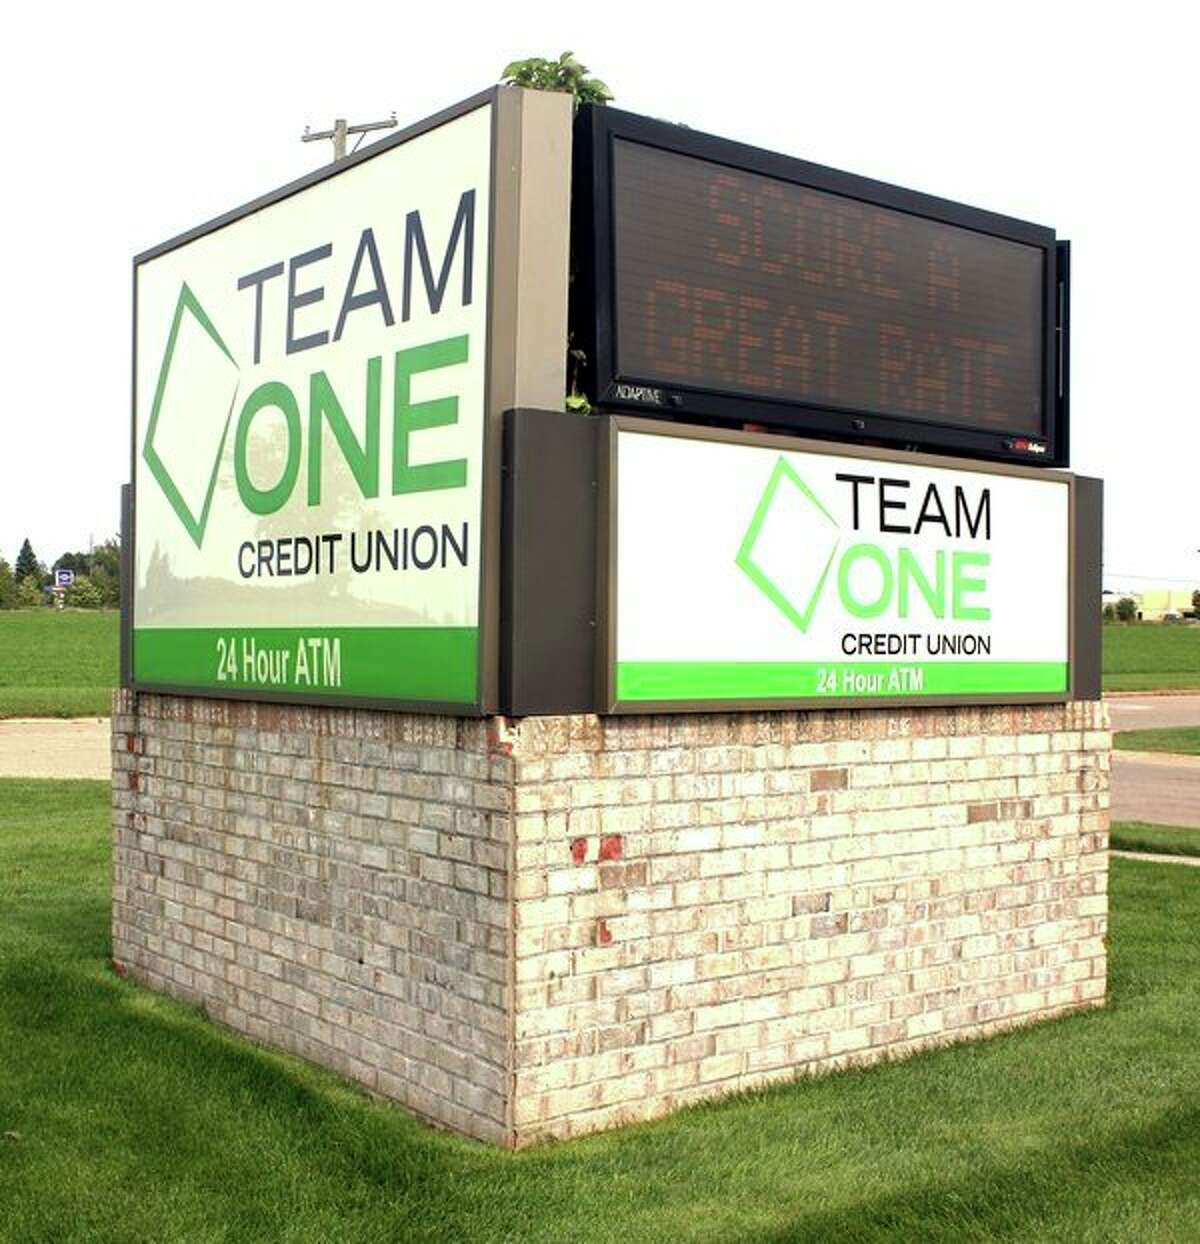 Team One Credit Union accounts hacked, money stolen, CEO says